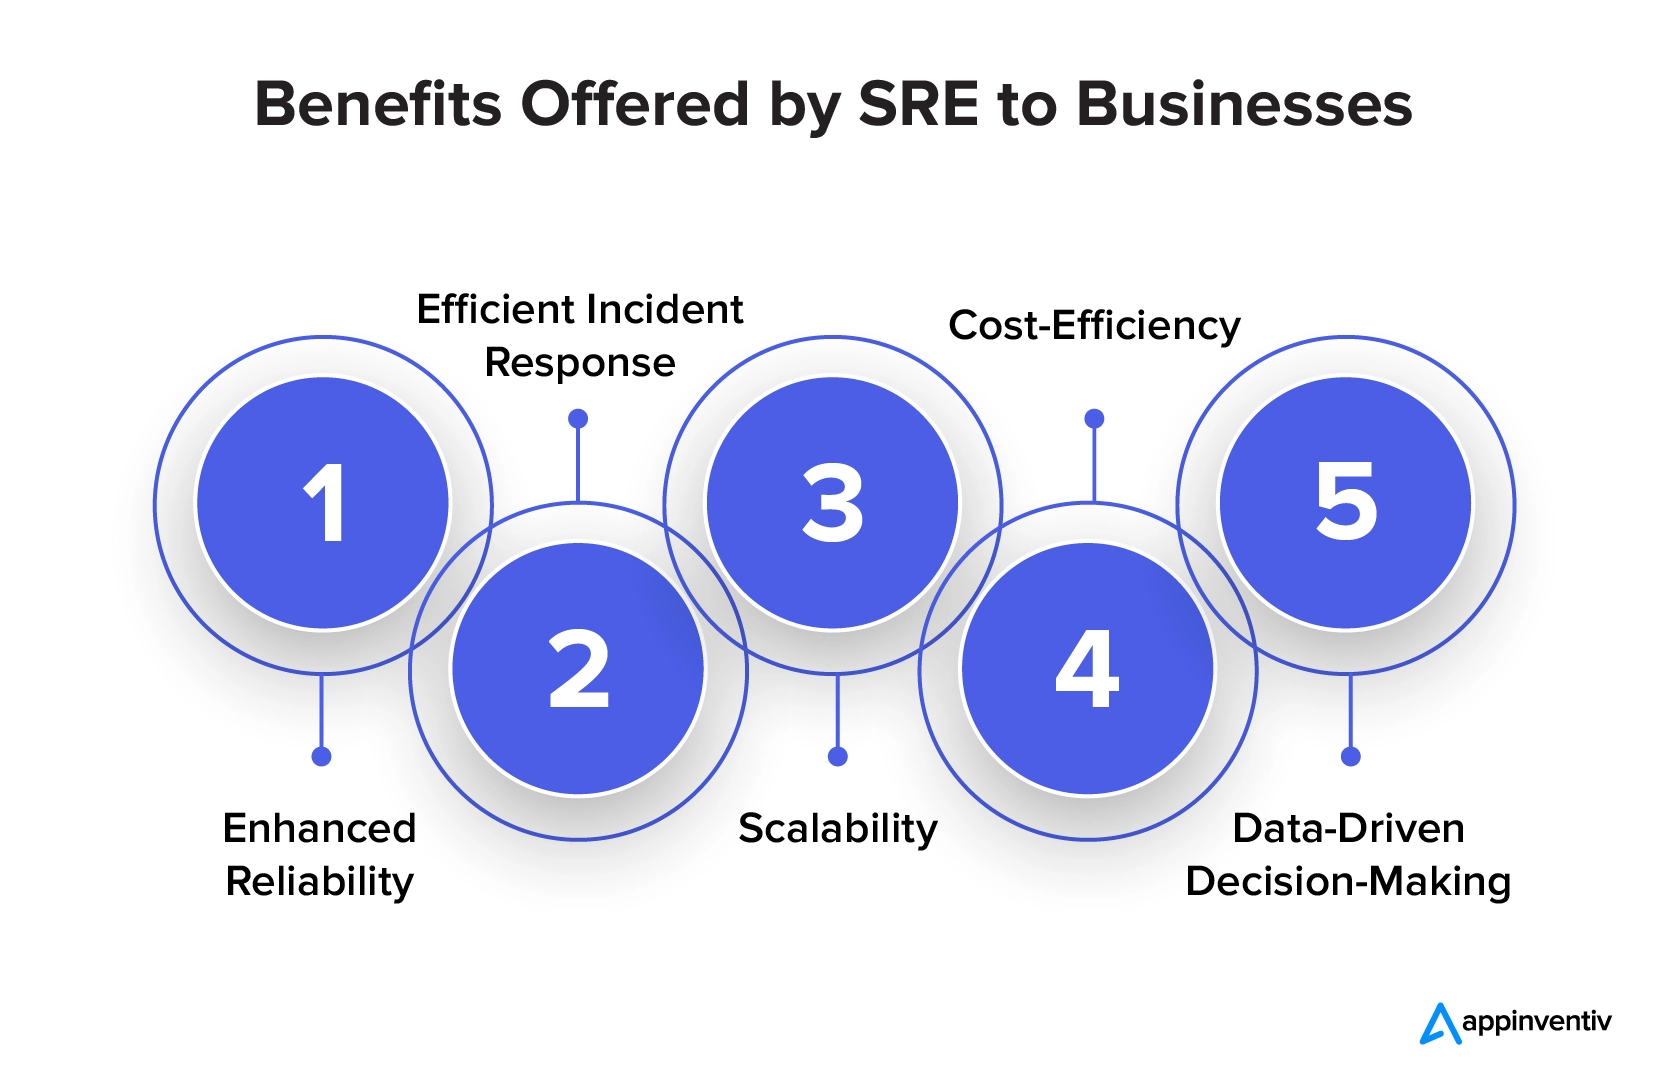 Benefits Offered by SRE to Businesses